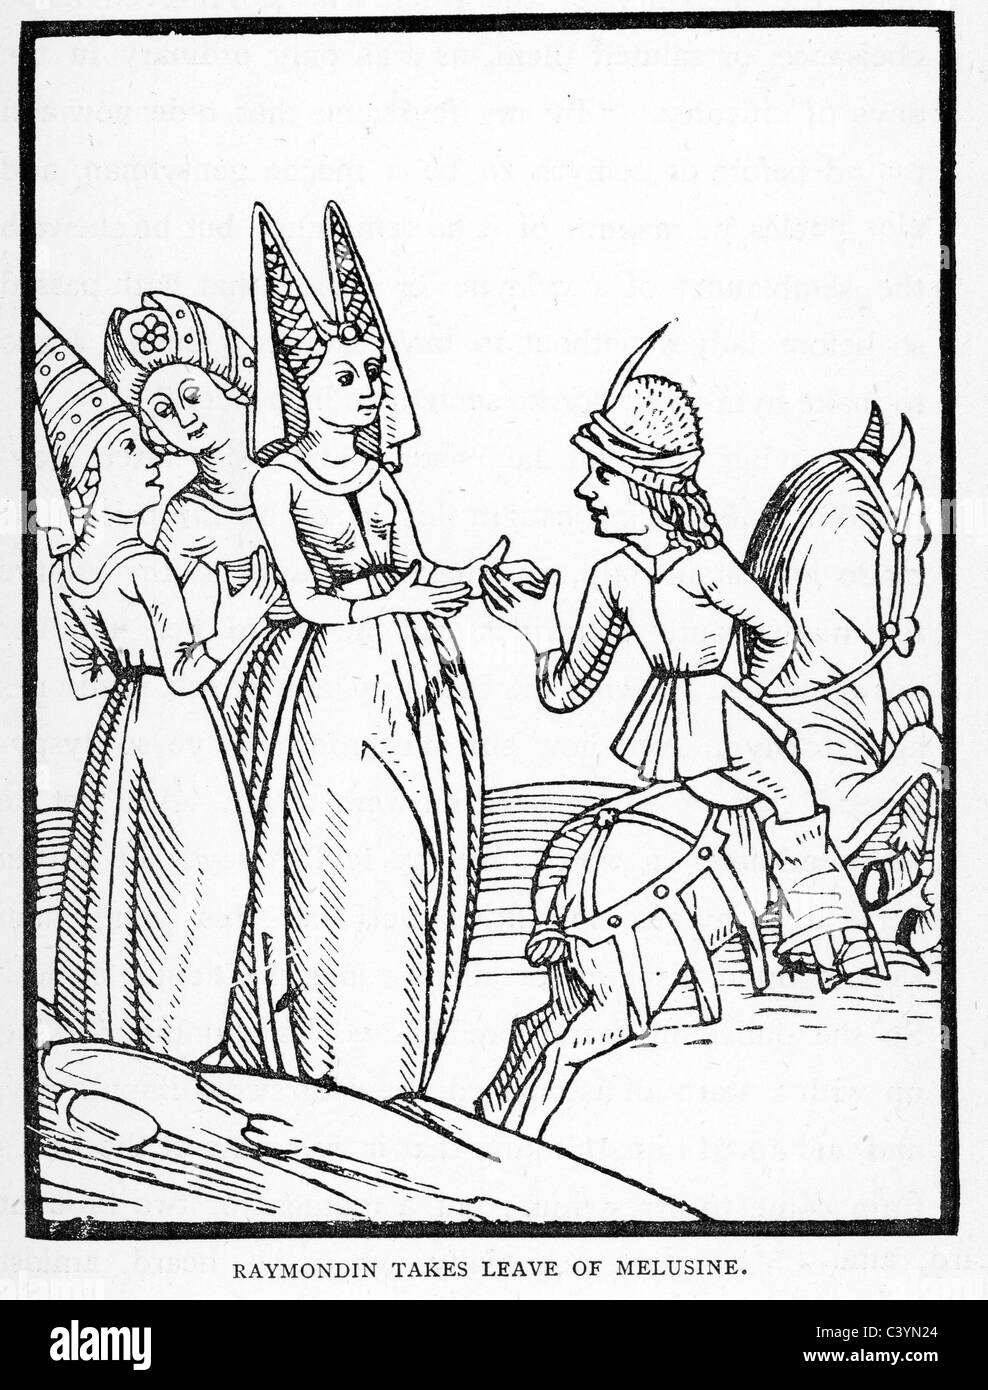 Medieval woodcut from the story of Melusine. Raymond takes leave of Melusine Stock Photo